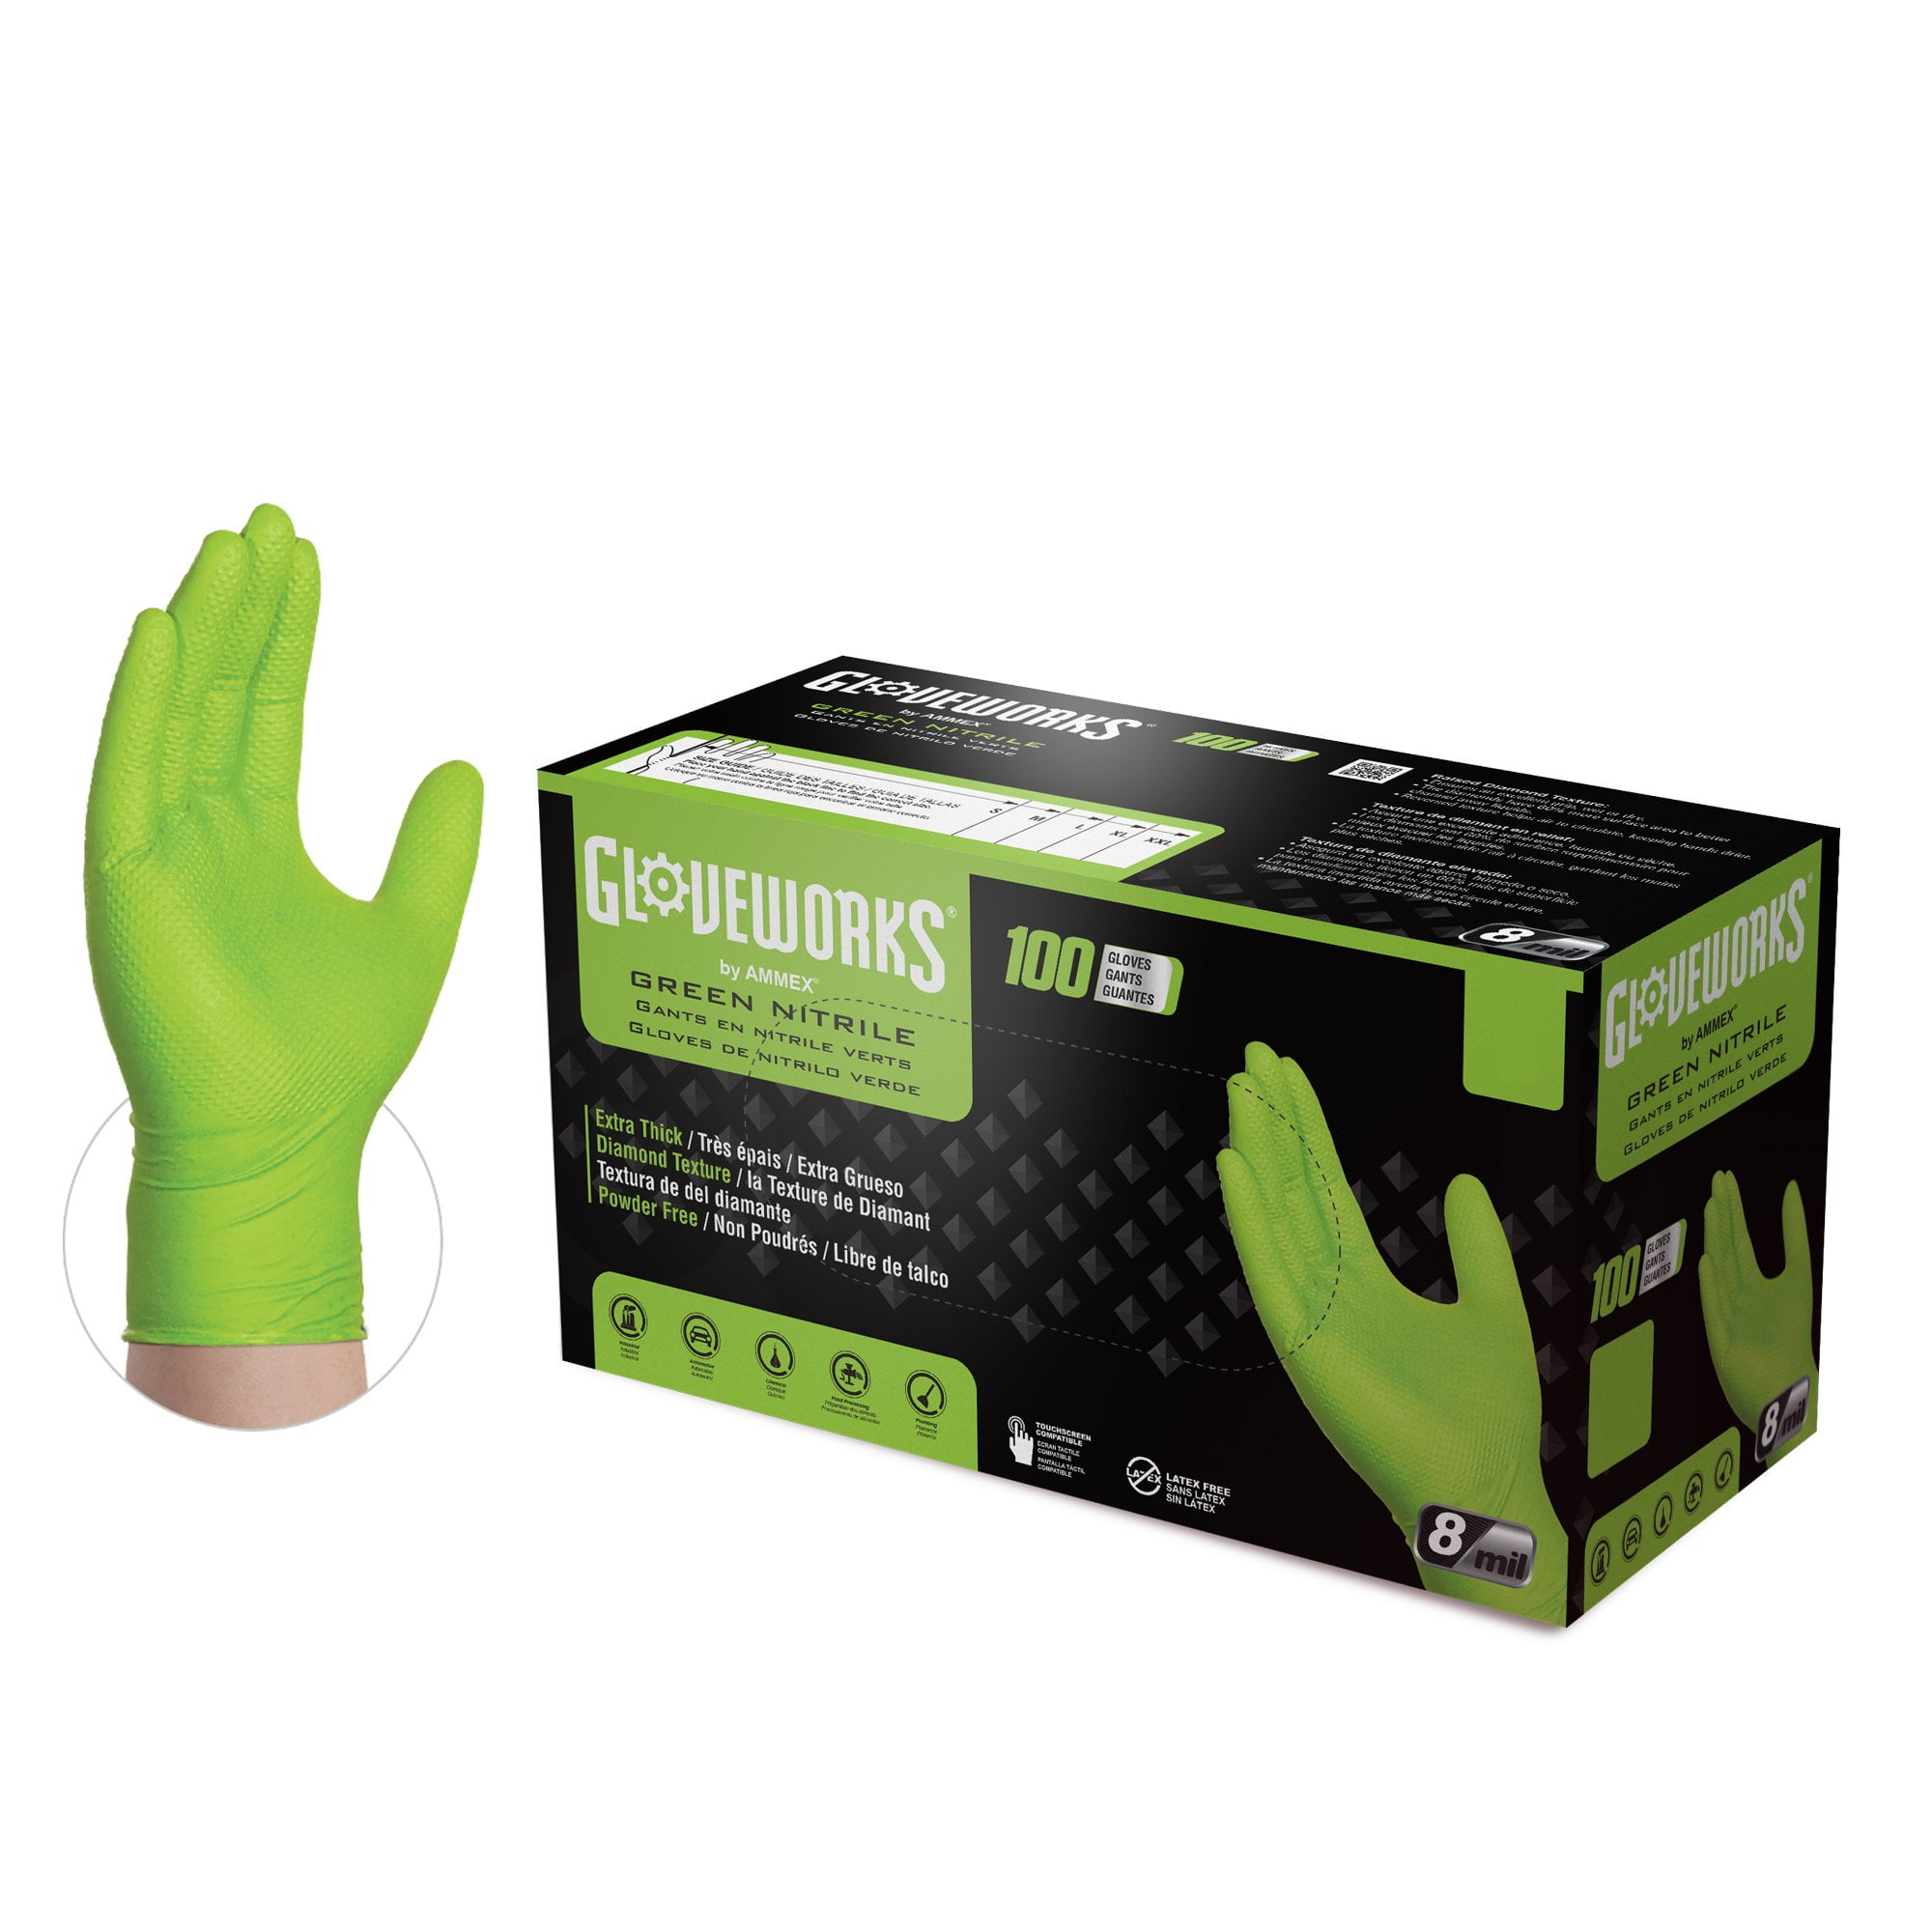 Adenna Catch ProWorks Pyramid Grip Neon Green Nitrile Disposable Gloves Powder Free, 8.5 Mil - LxBox (100)